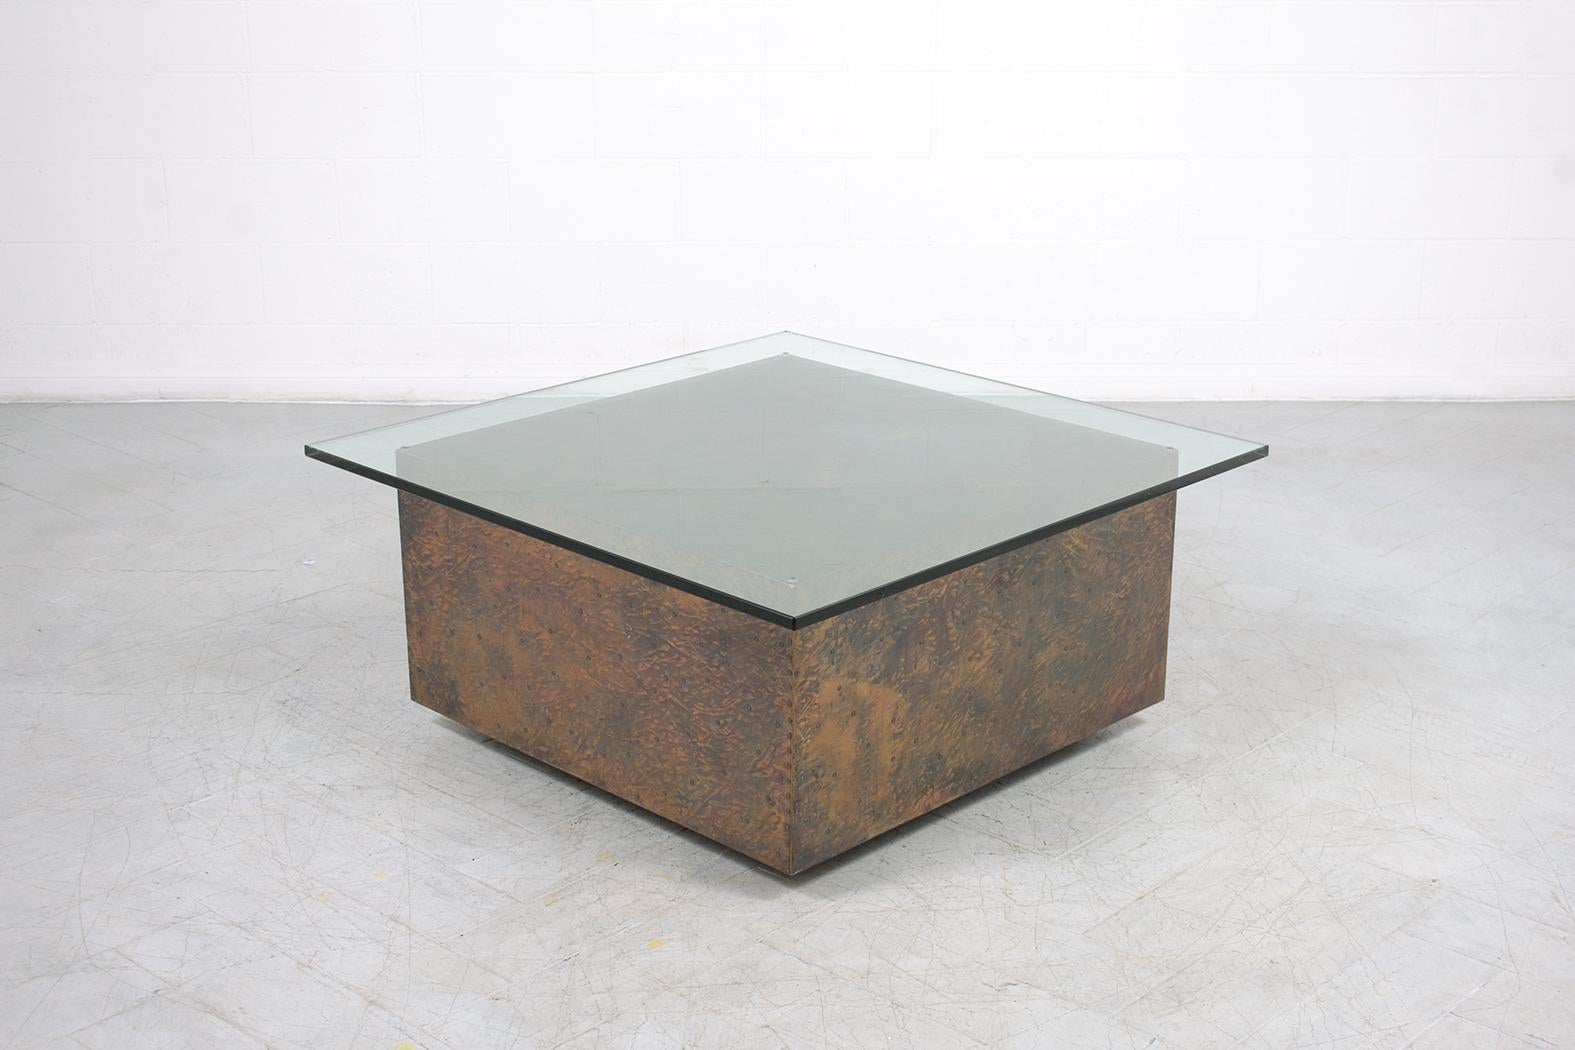 This organic modern vintage cocktail table is hand-crafted out of hammered zinc and glass and is in good condition entirely restored by our professional craftsmen team in the house. The coffee table is eye-catching and features a squared 3/8